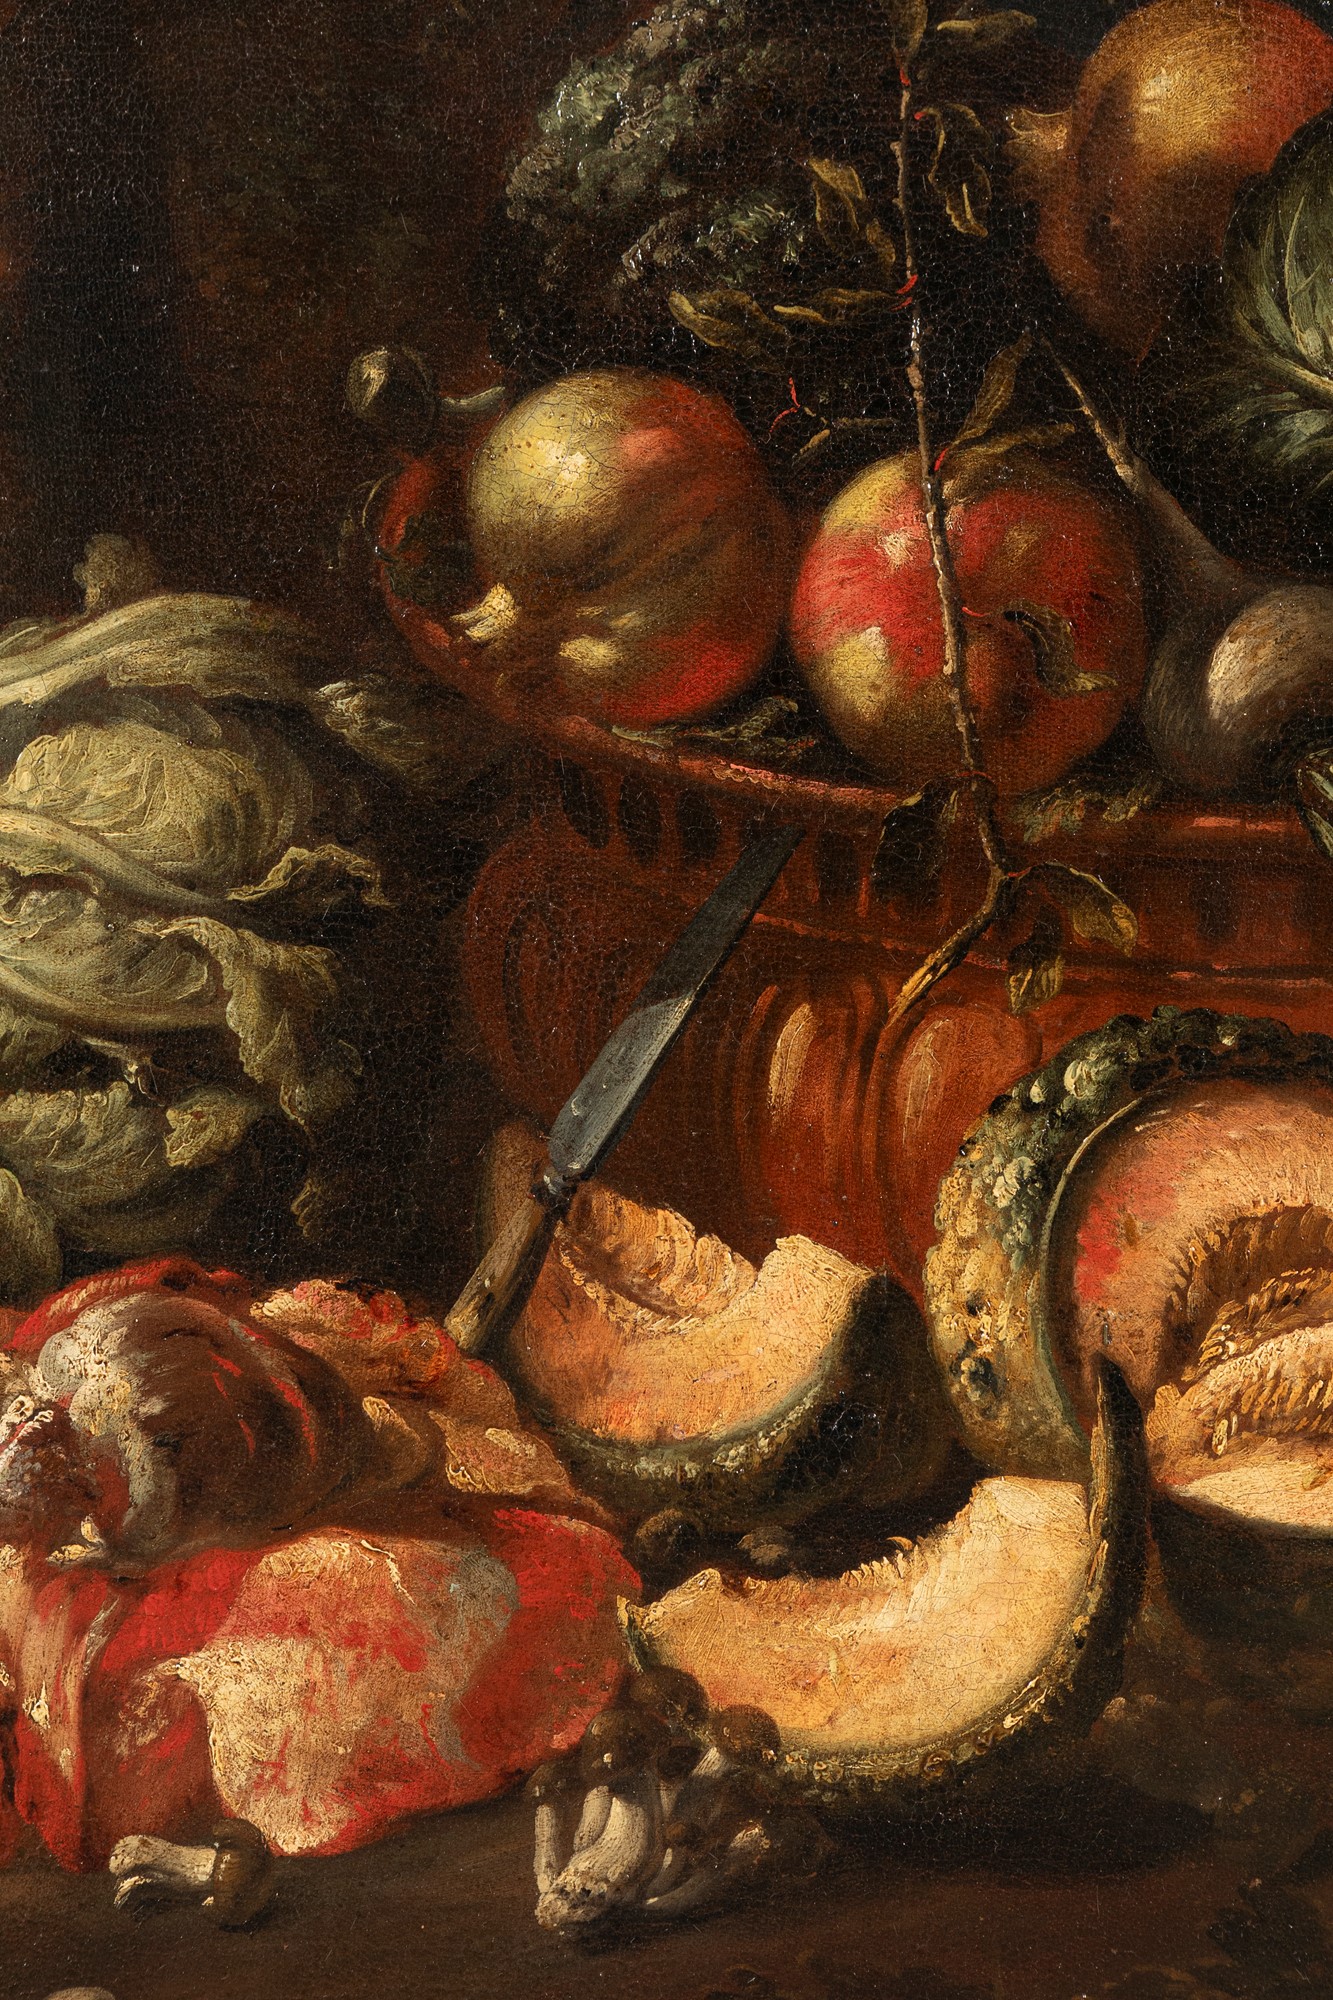 Felice Boselli (Piacenza 1650-Parma 1732) - Entrails, vegetables and fruits with a owl - Image 5 of 7